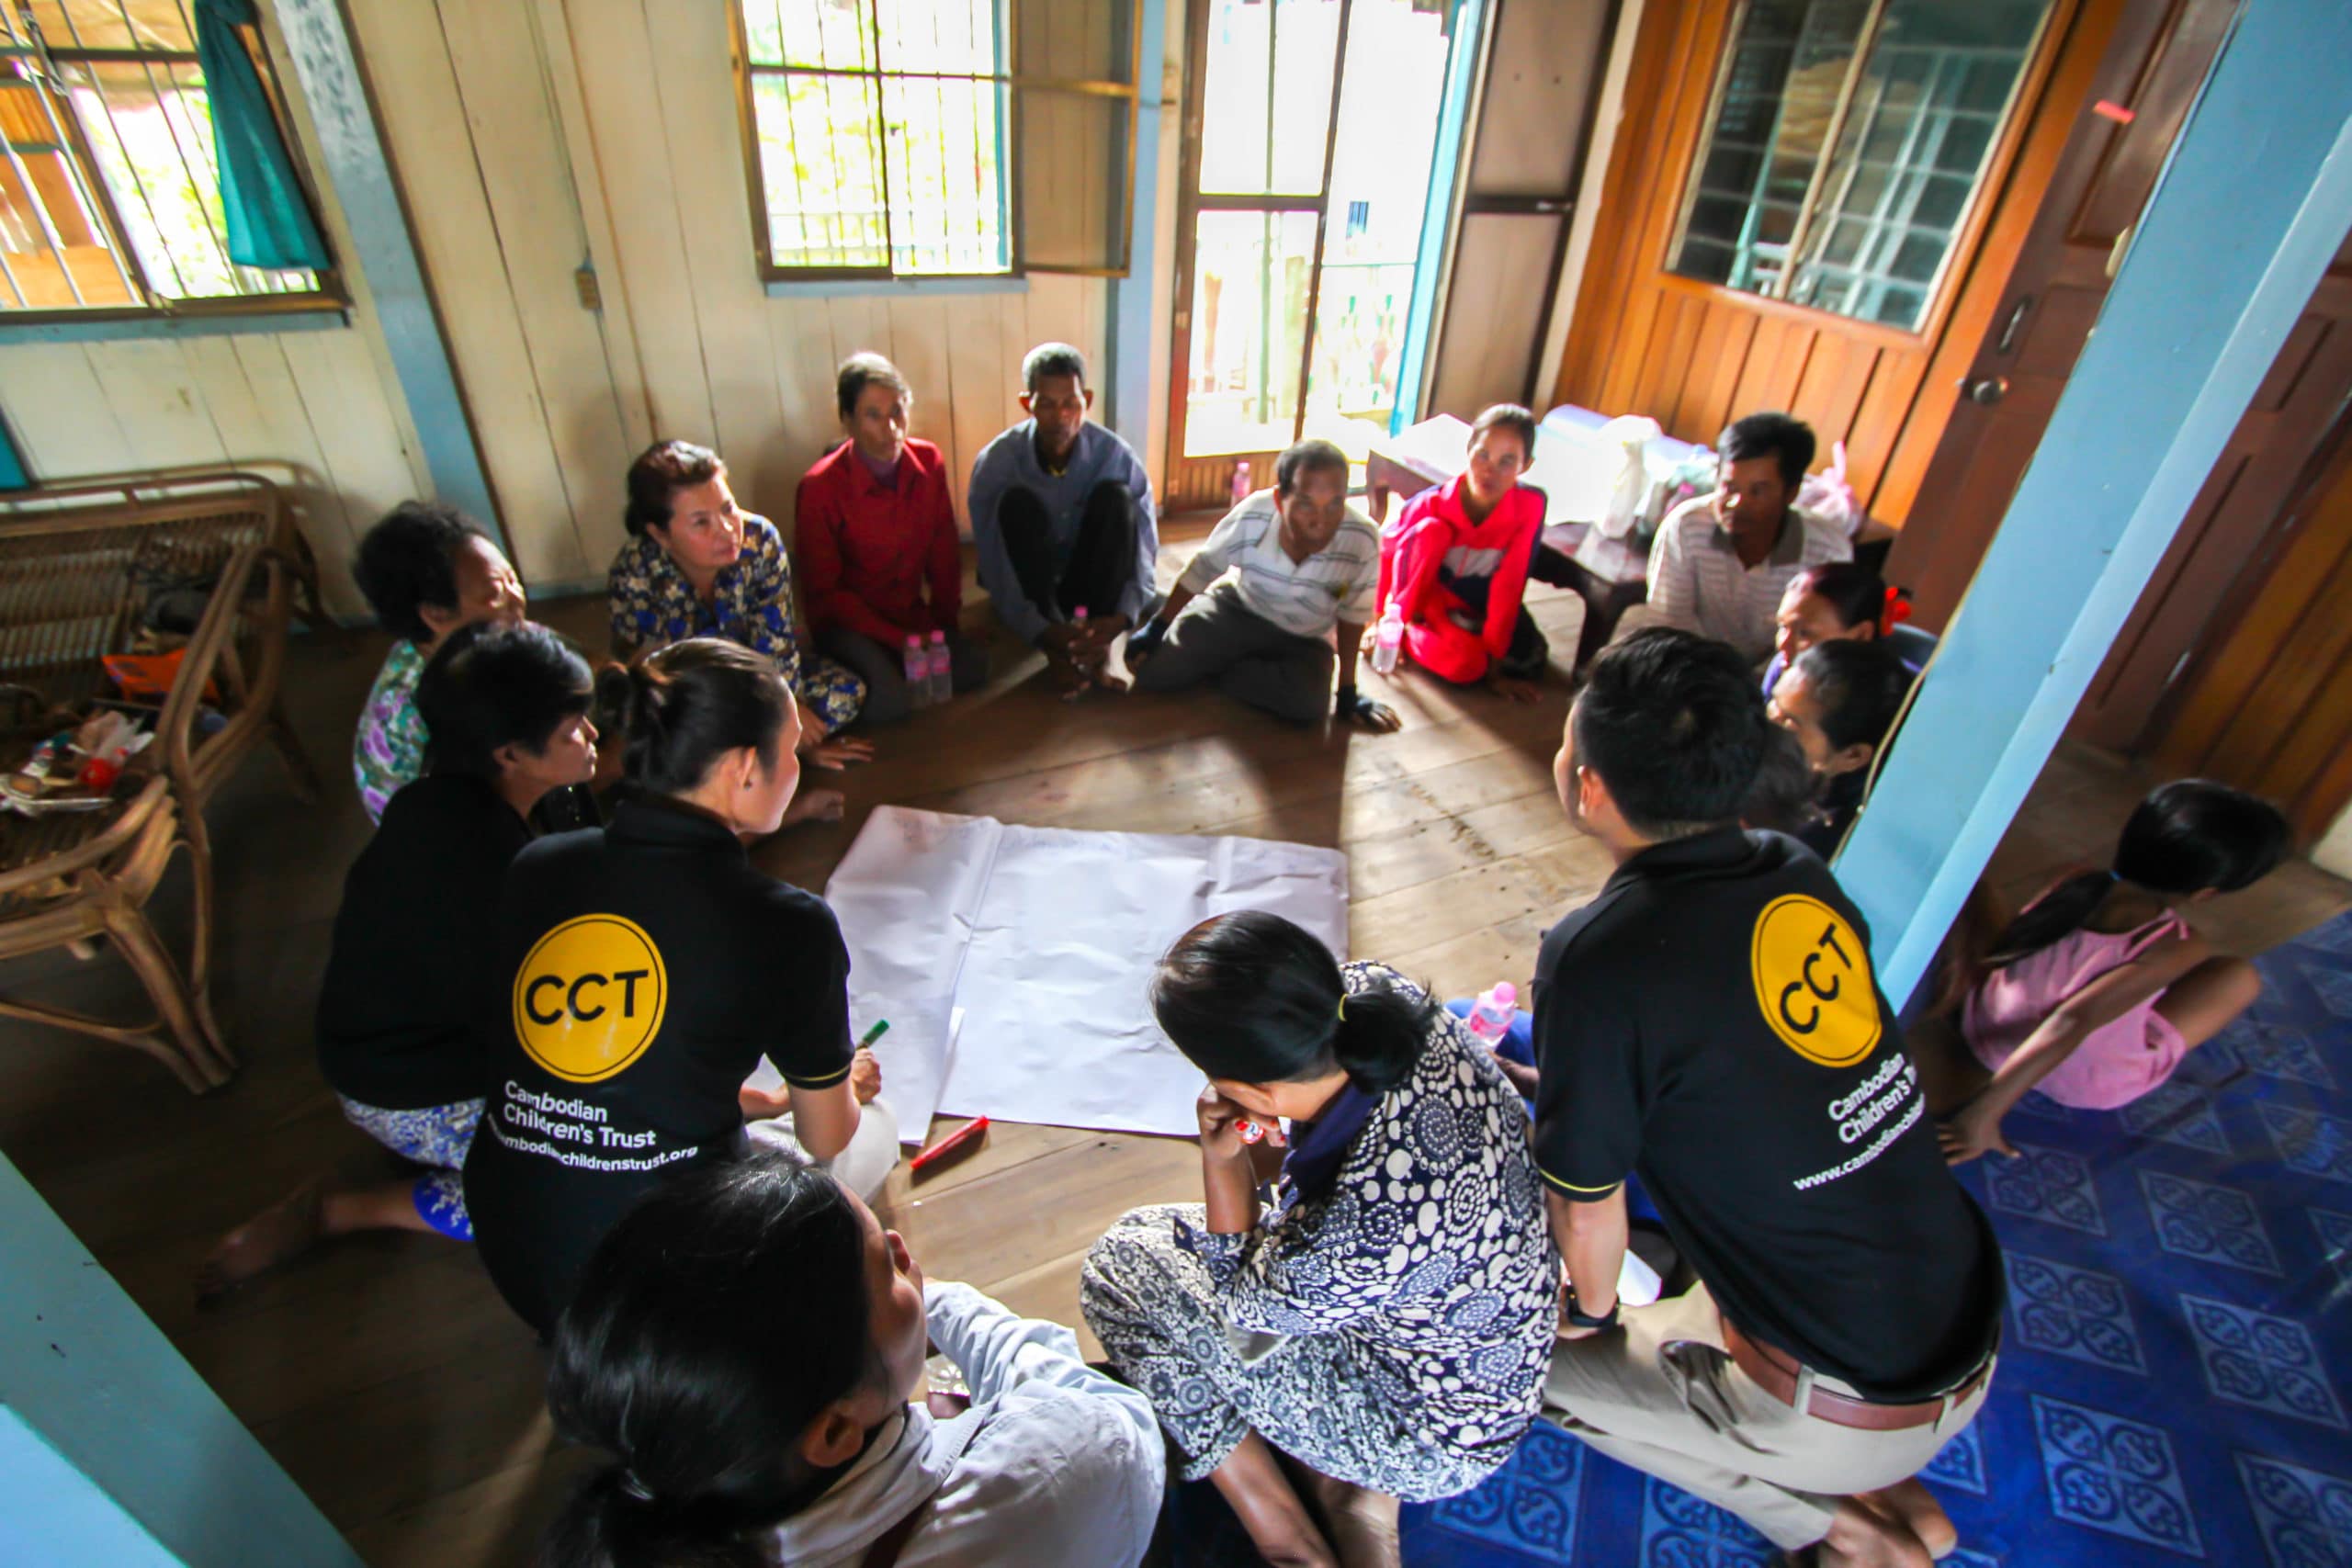 CCT team members working with community members, providing a Parenting skills workshop while seated in a circle on the floor